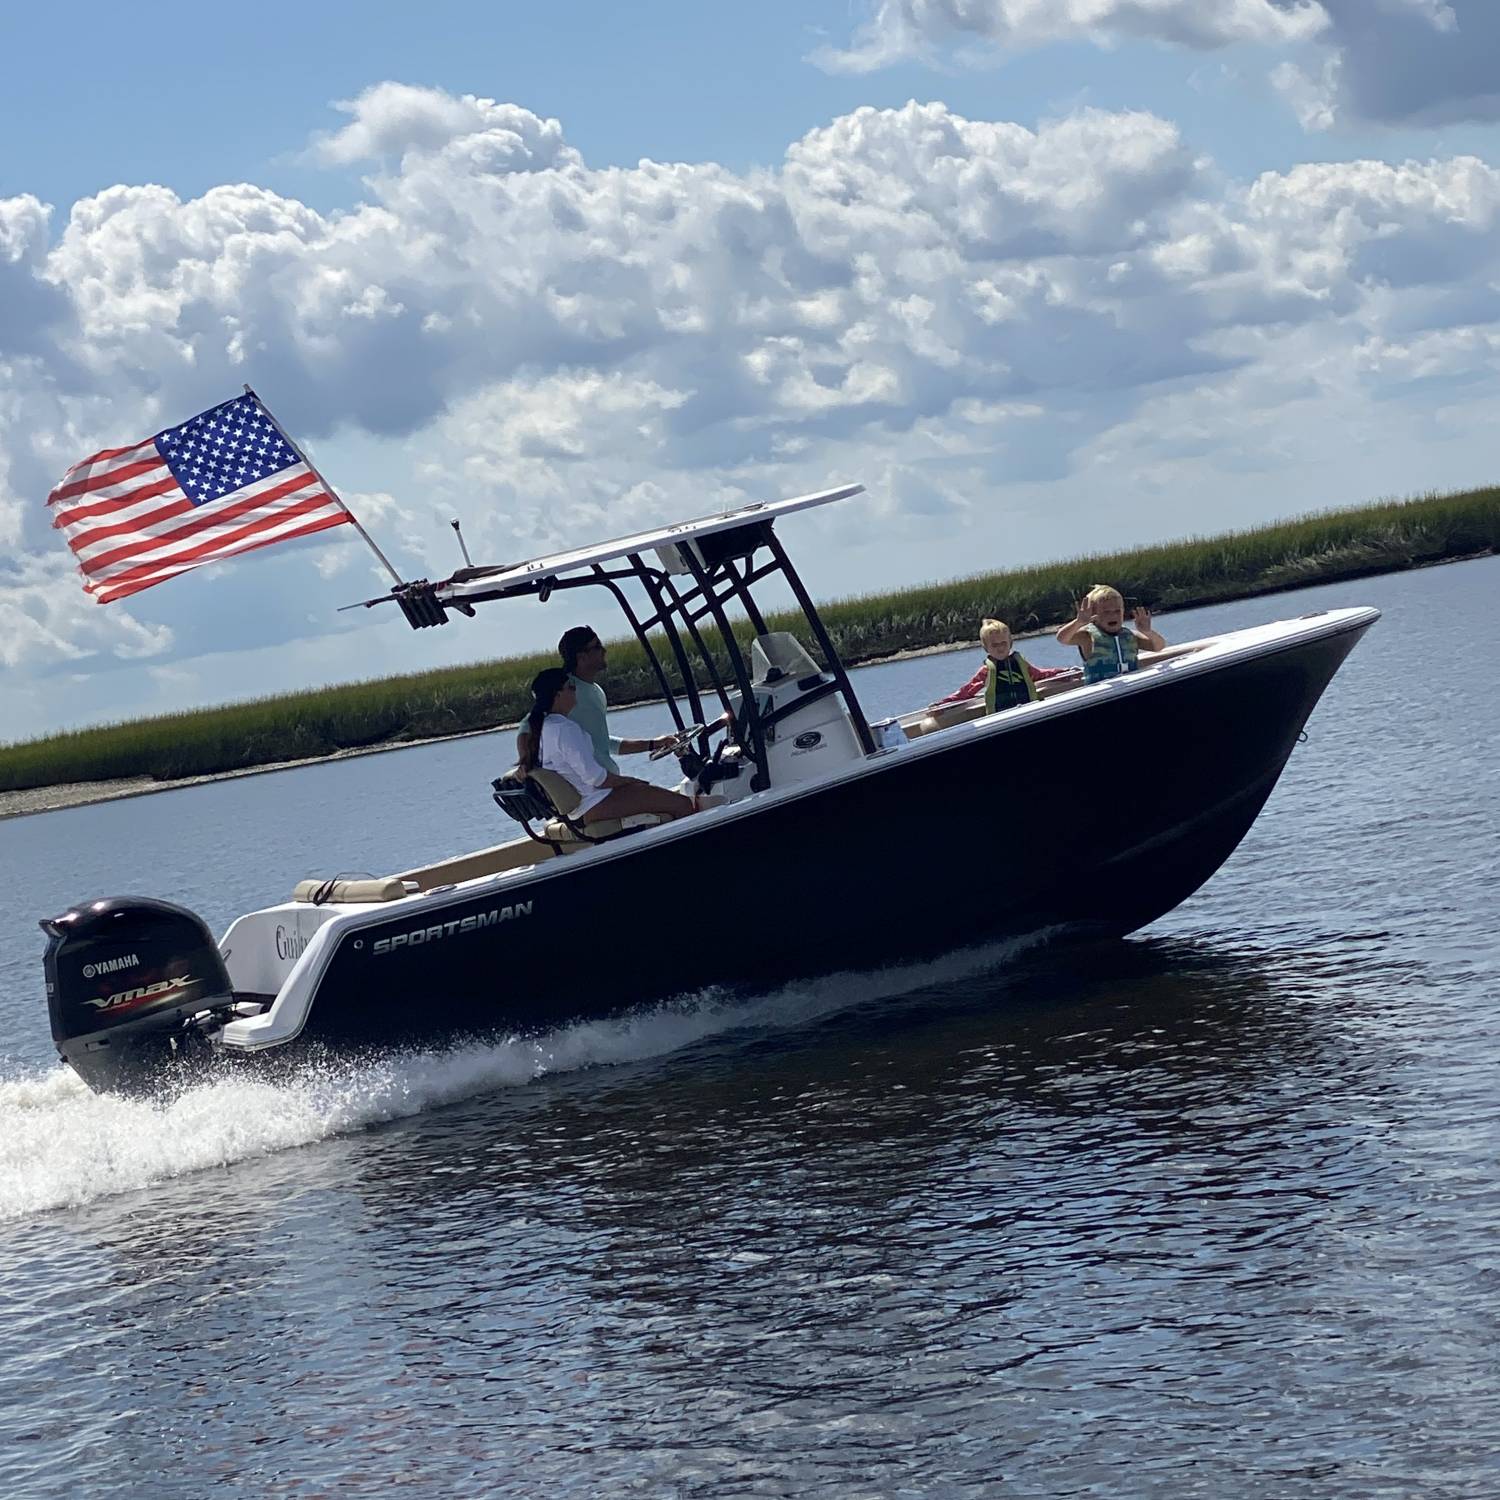 Title: Freedom - On board their Sportsman Heritage 231 Center Console - Location: Richmond Hill Ga. Participating in the Photo Contest #SportsmanFebruary2022